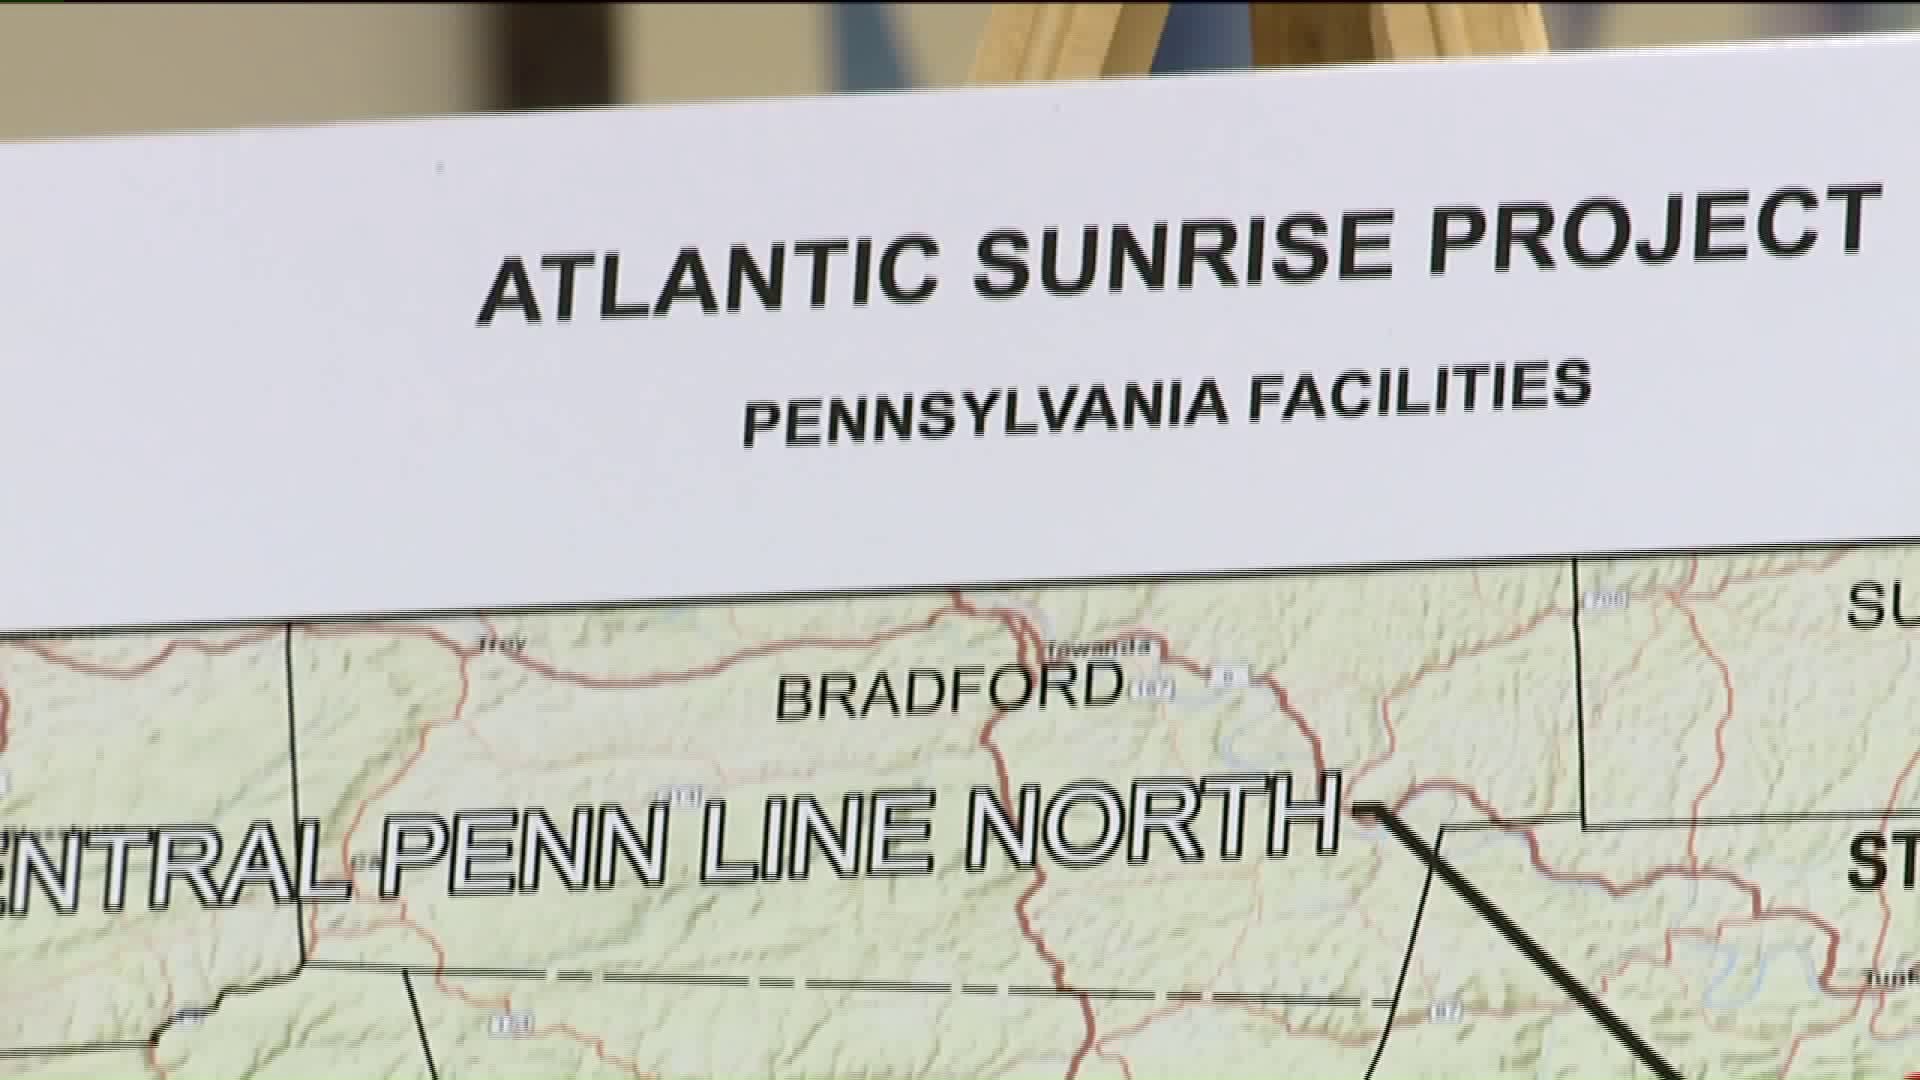 Public Sounding off on Controversial Natural Gas Pipeline Project